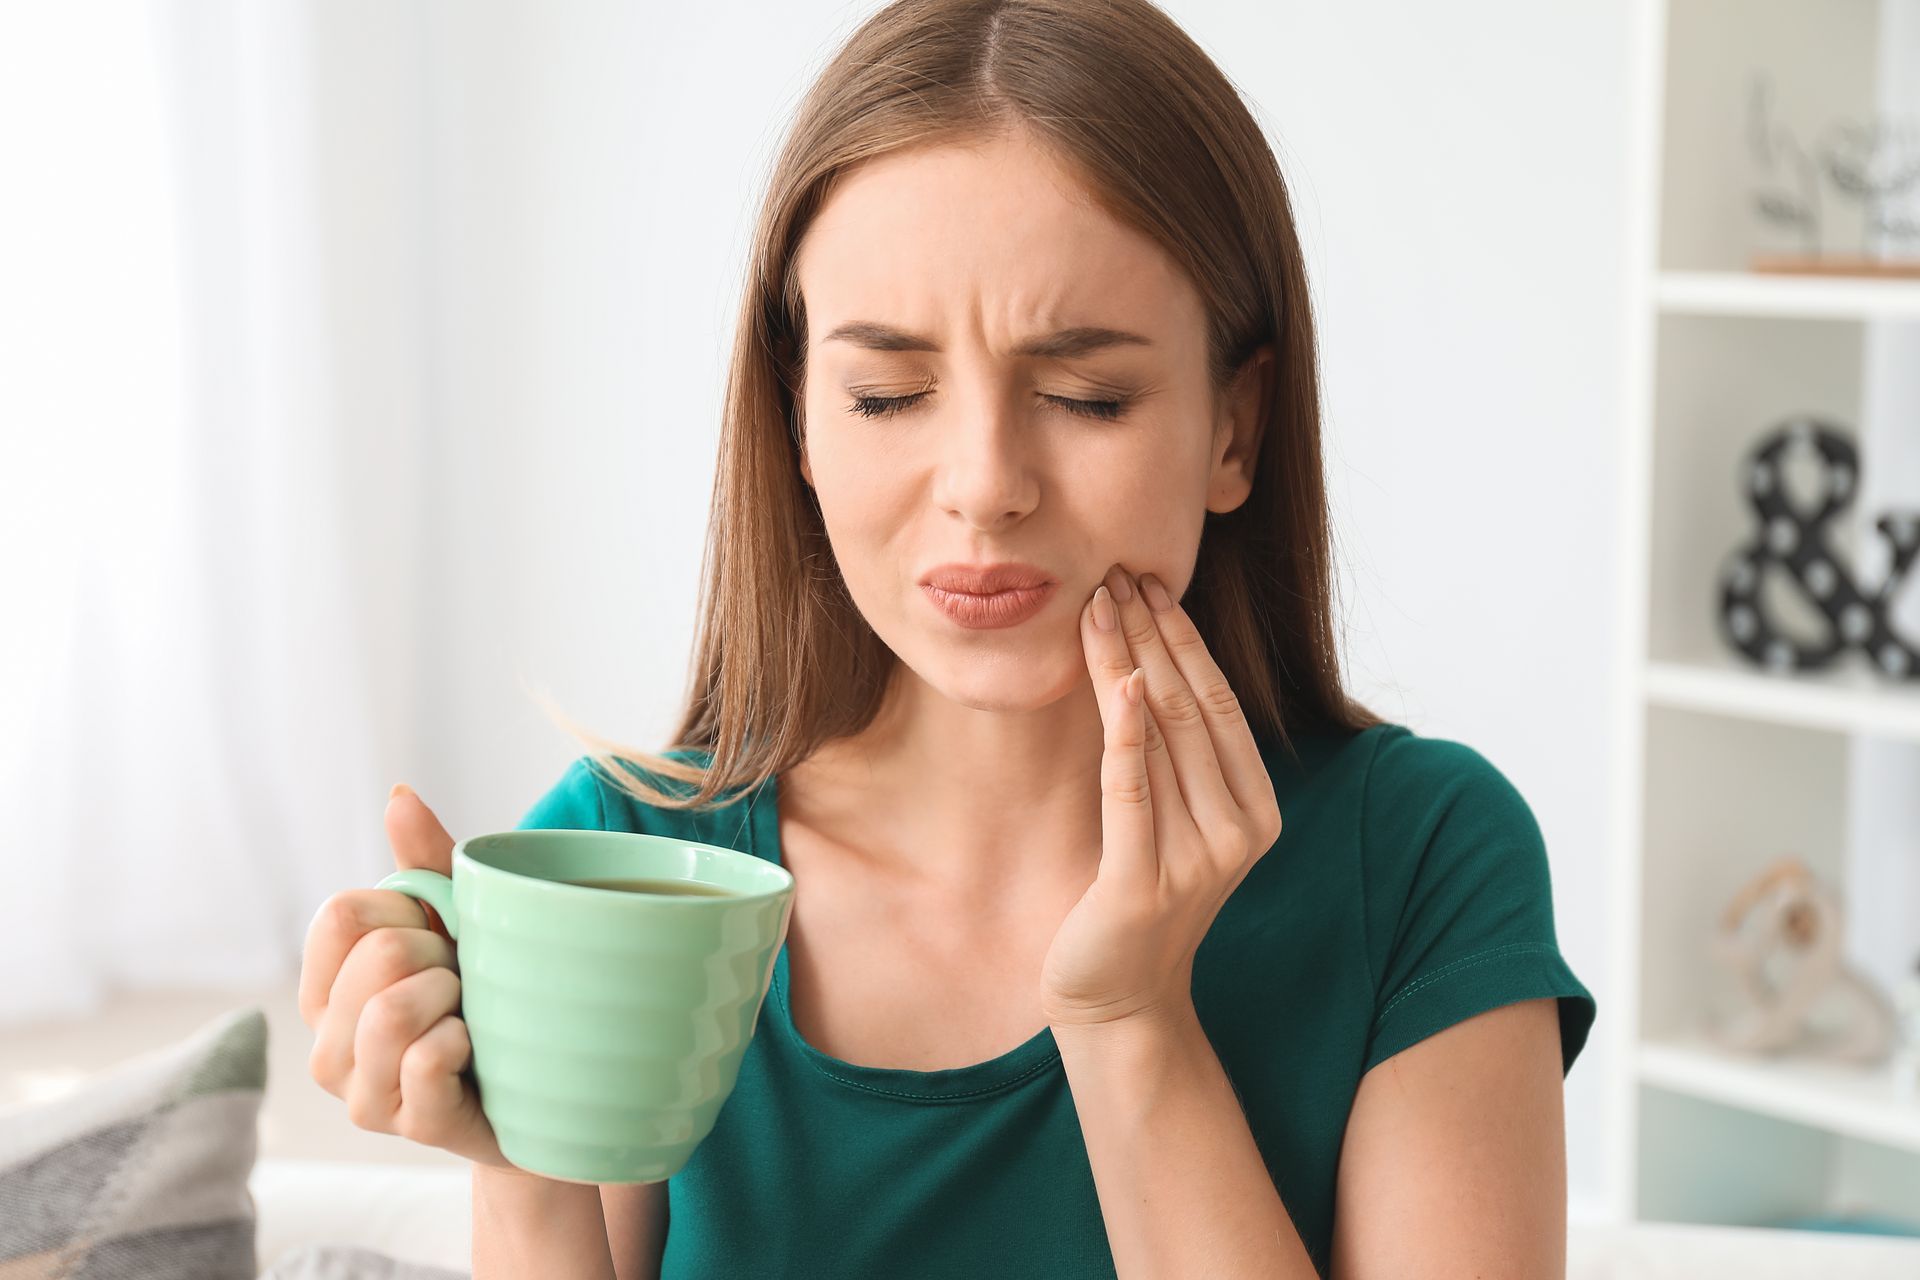 A woman is holding a cup of coffee and having a toothache.